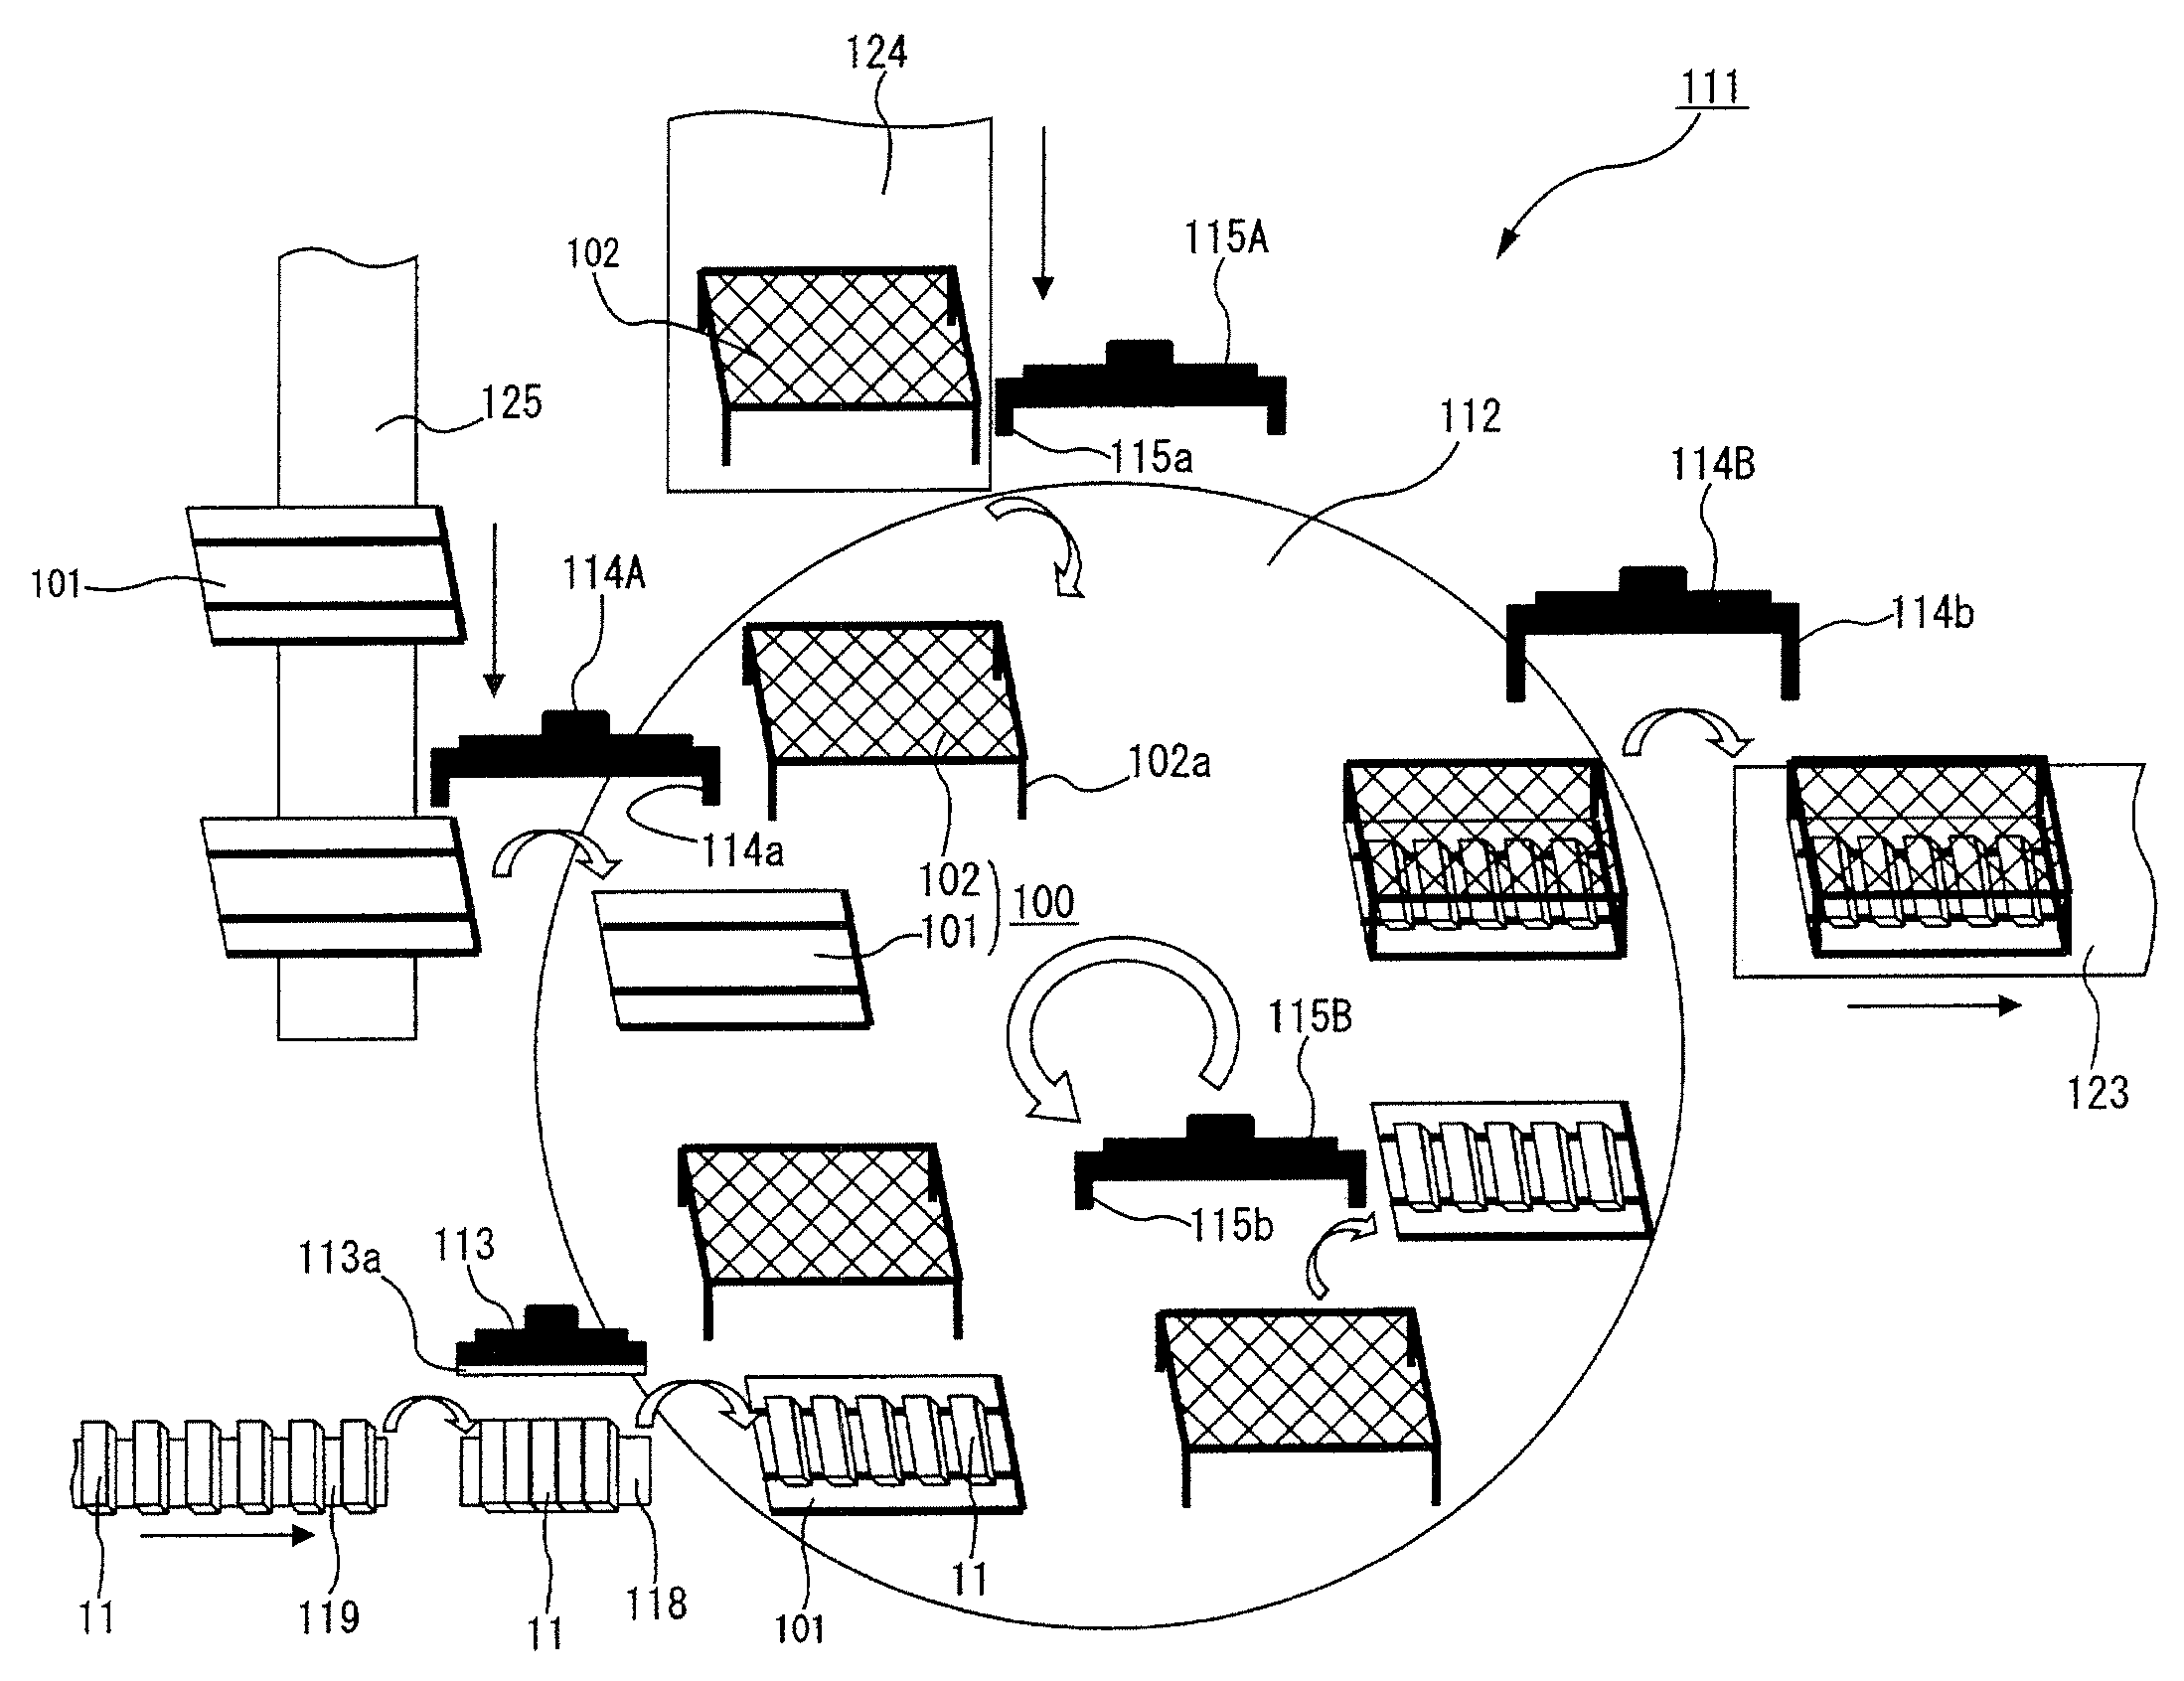 Degreasing jig assembling apparatus, degreasing jig disassembling apparatus, degreasing jig circulating apparatus, method for degreasing ceramic molded body, and method for manufacturing honeycomb structured body